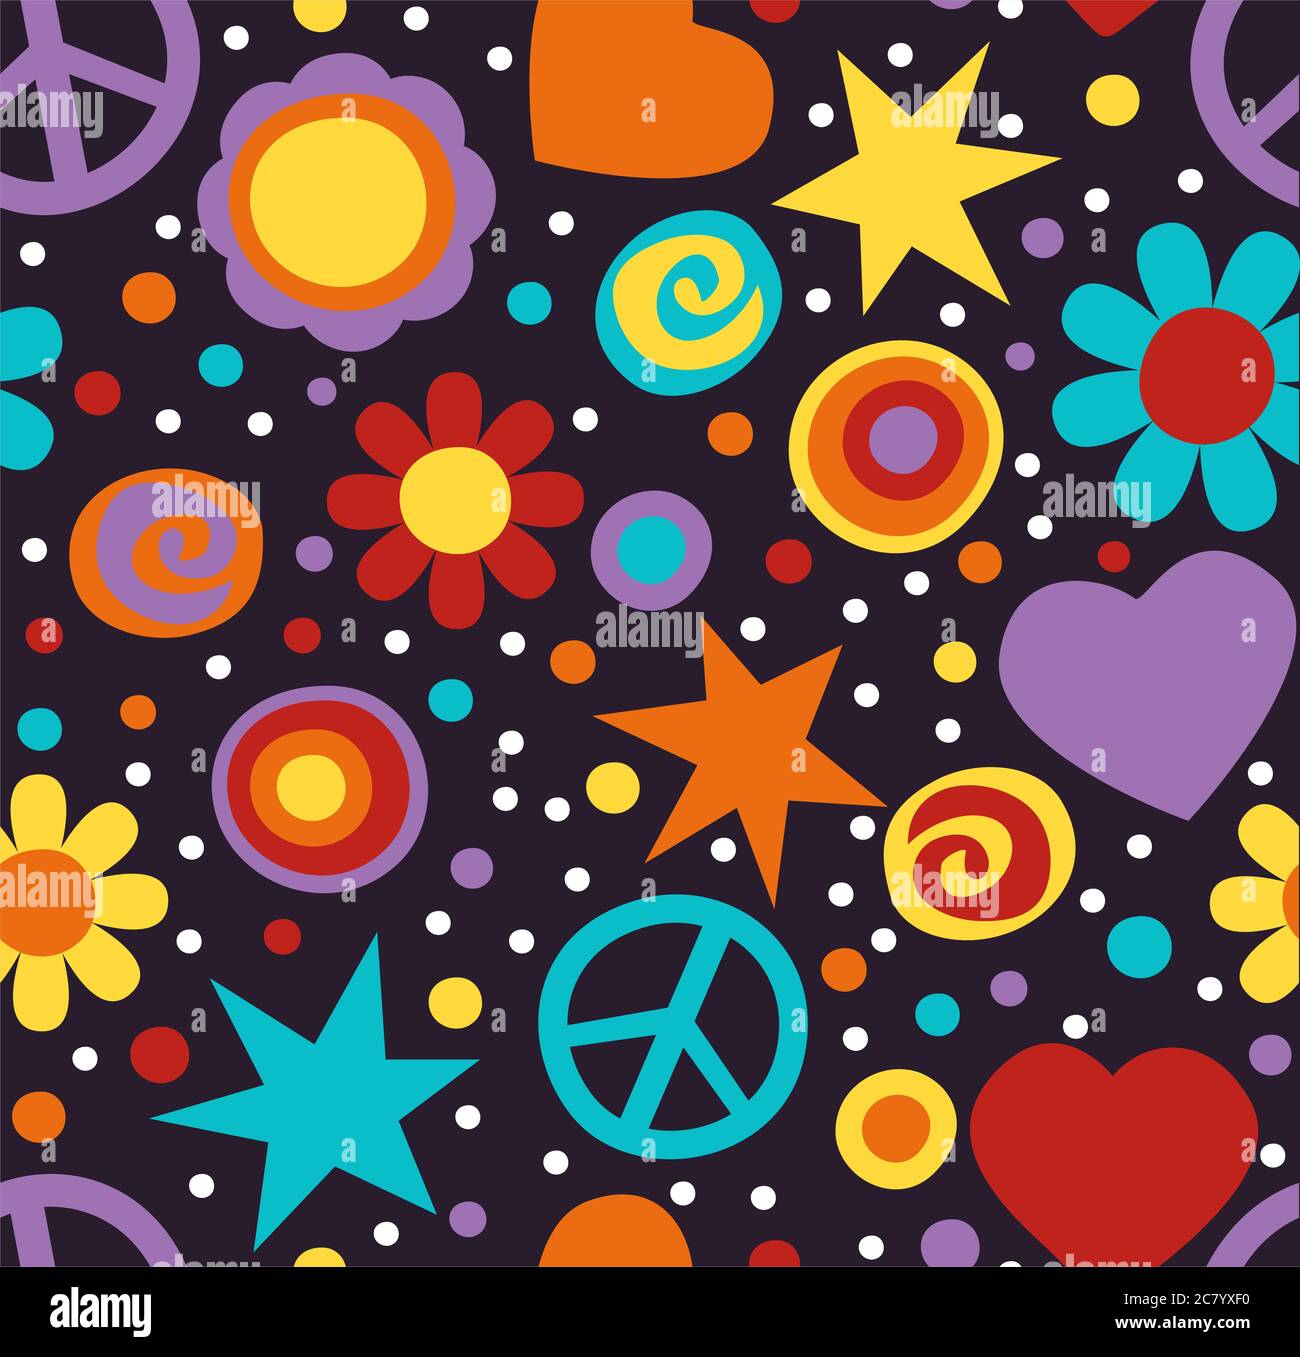 Colorful hippie seamless pattern with peace signs, hearts and flowers Stock Photo